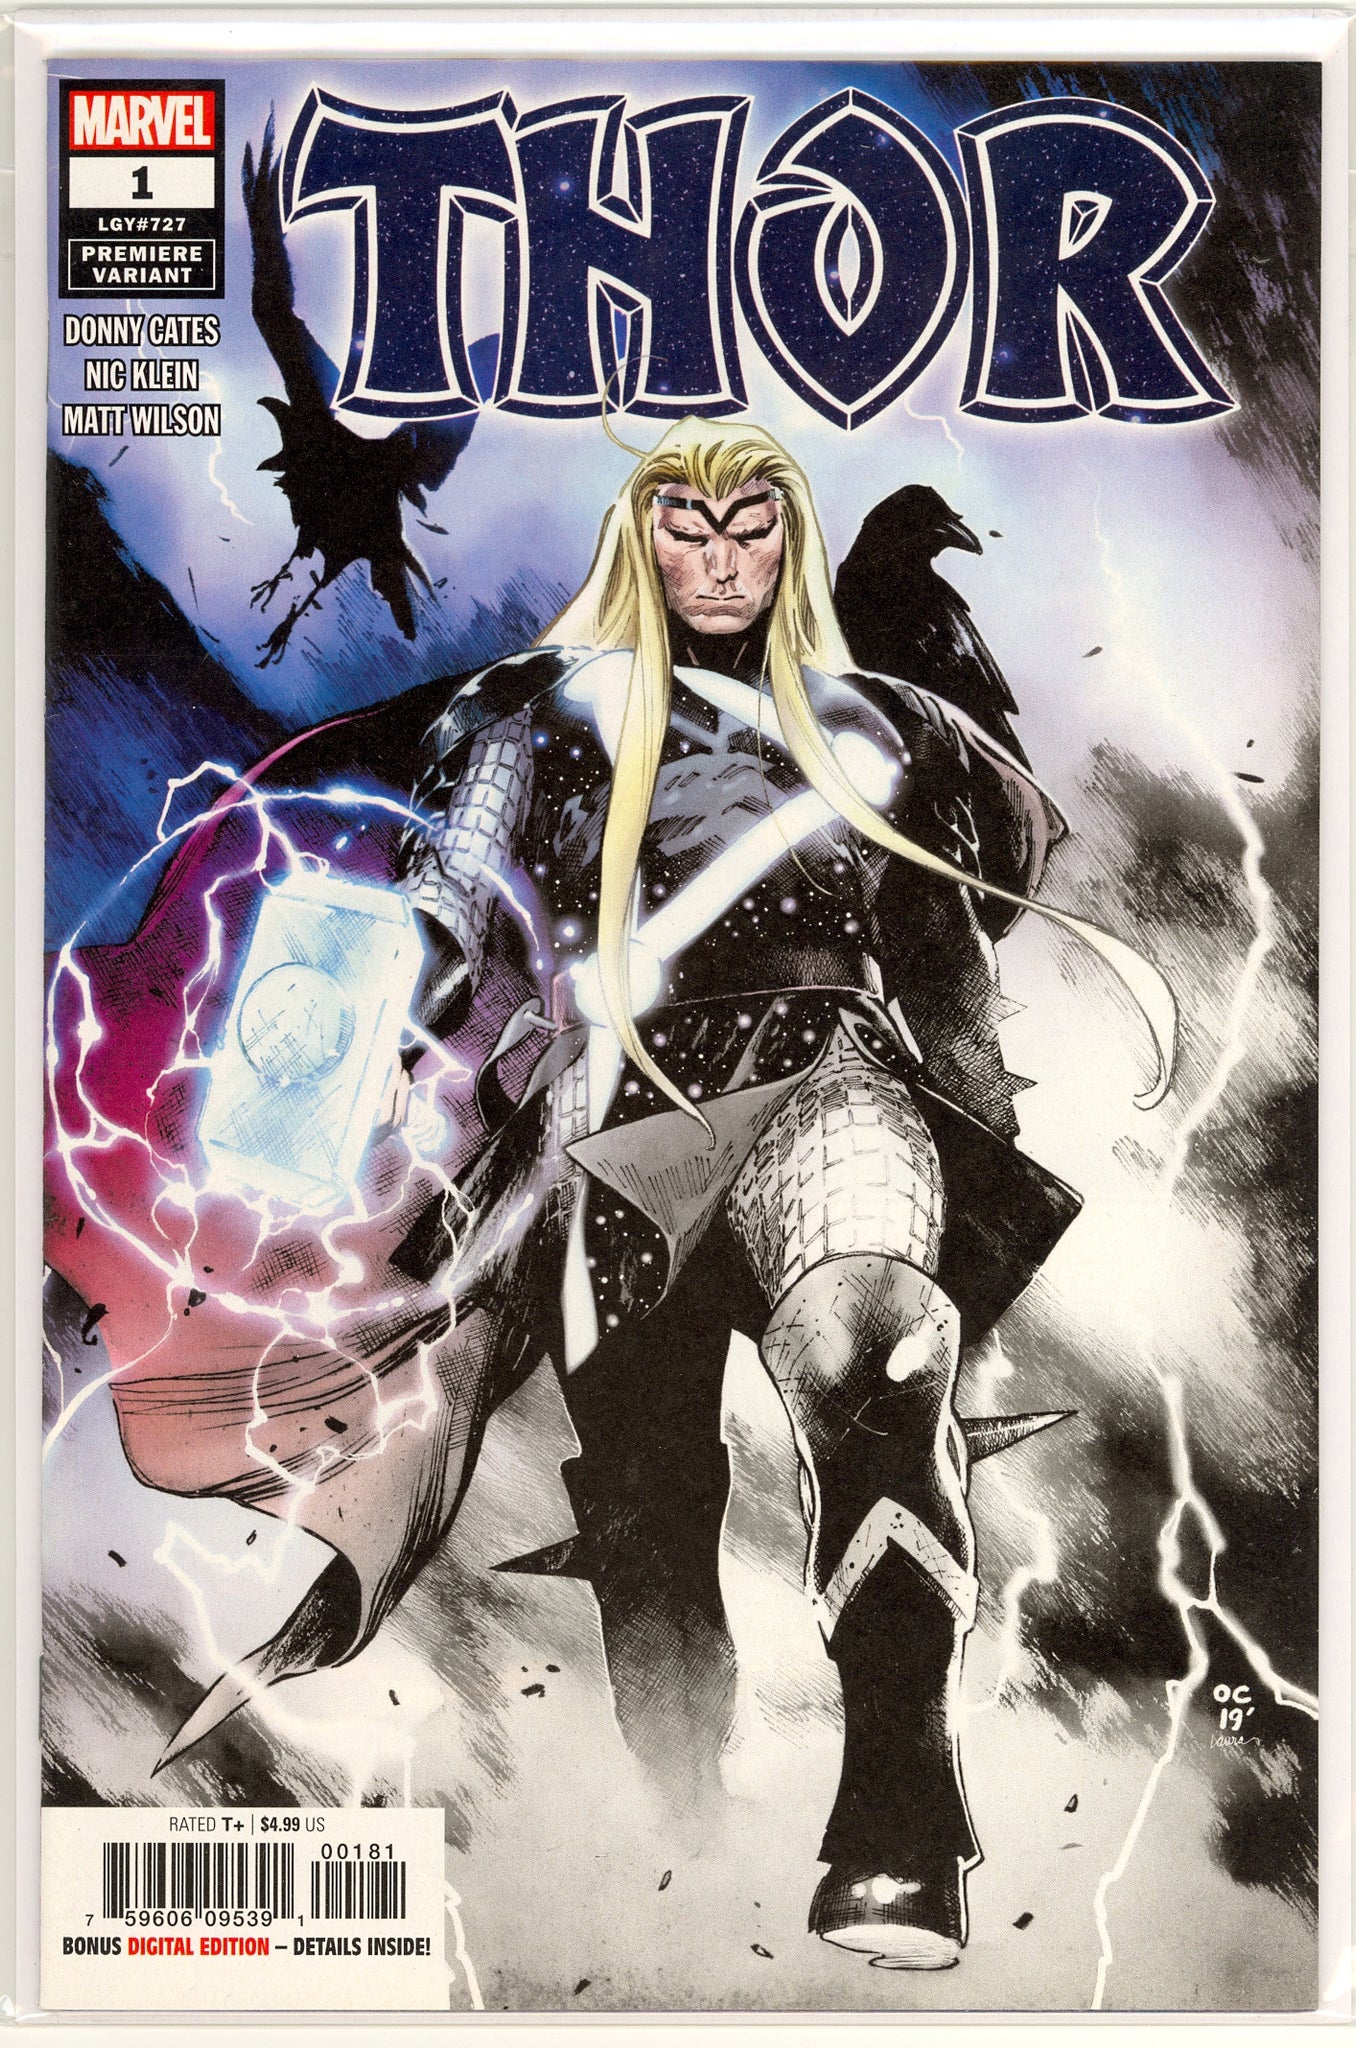 Thor #1 (2020) "Premiere Variant" cover